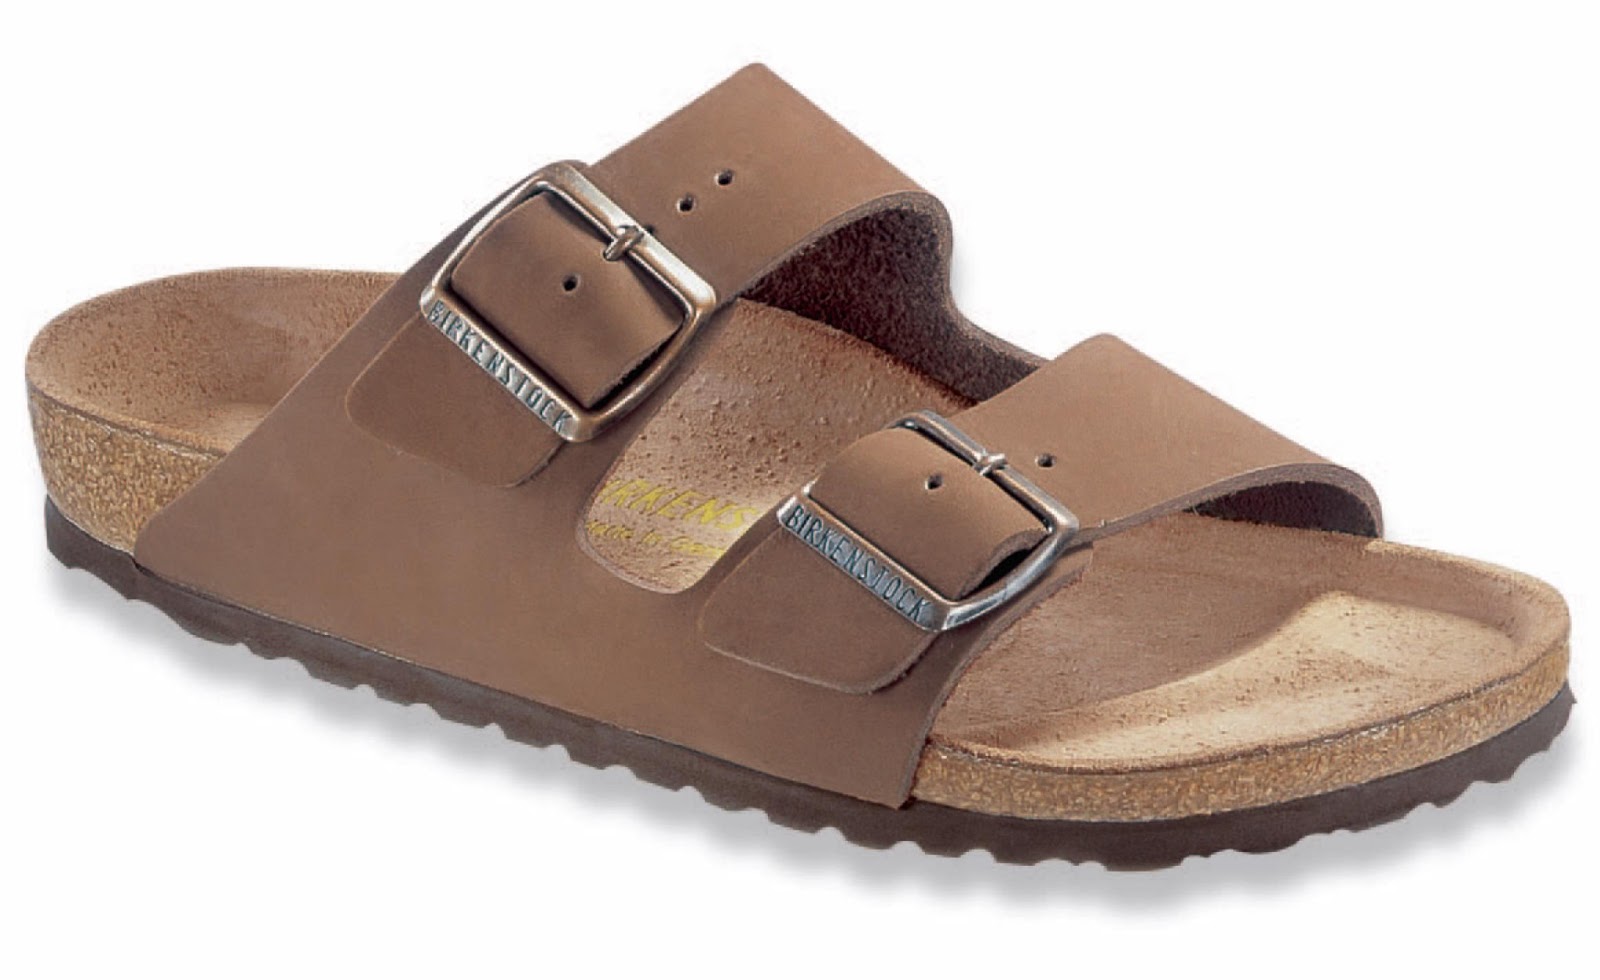 Why people prefer these kinds of sandals?